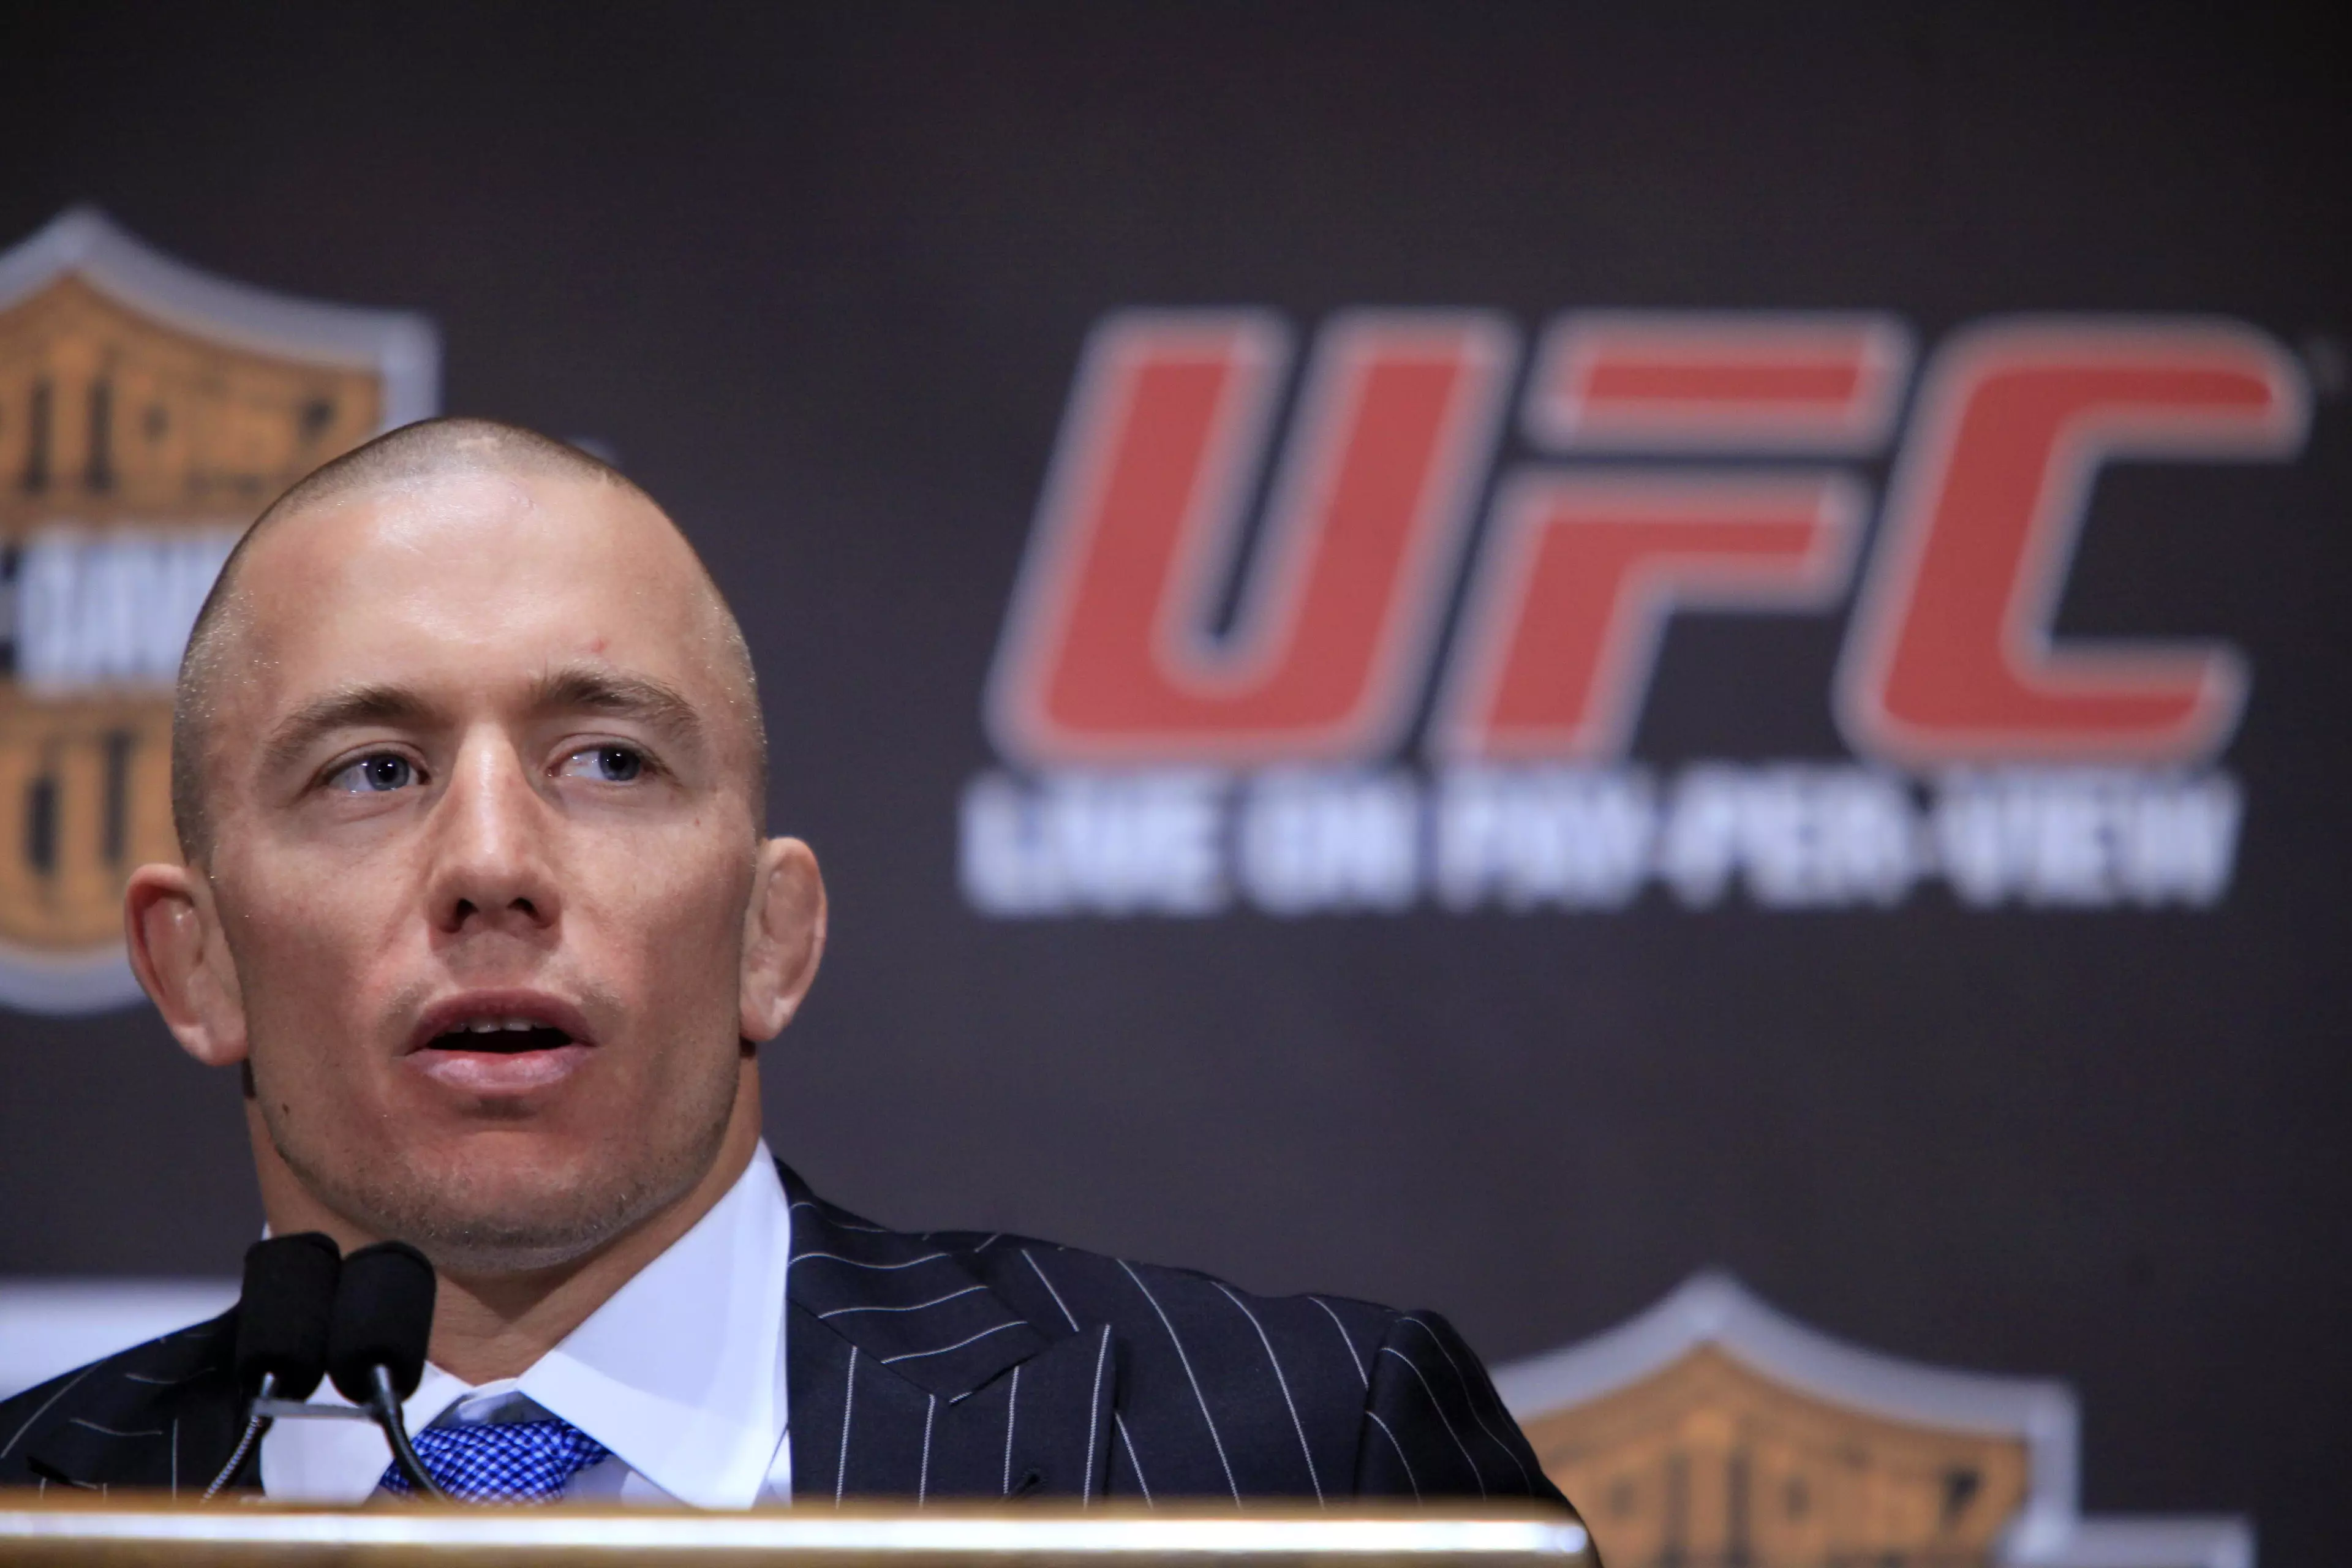 Georges St-Pierre Is Ready To Return To The UFC